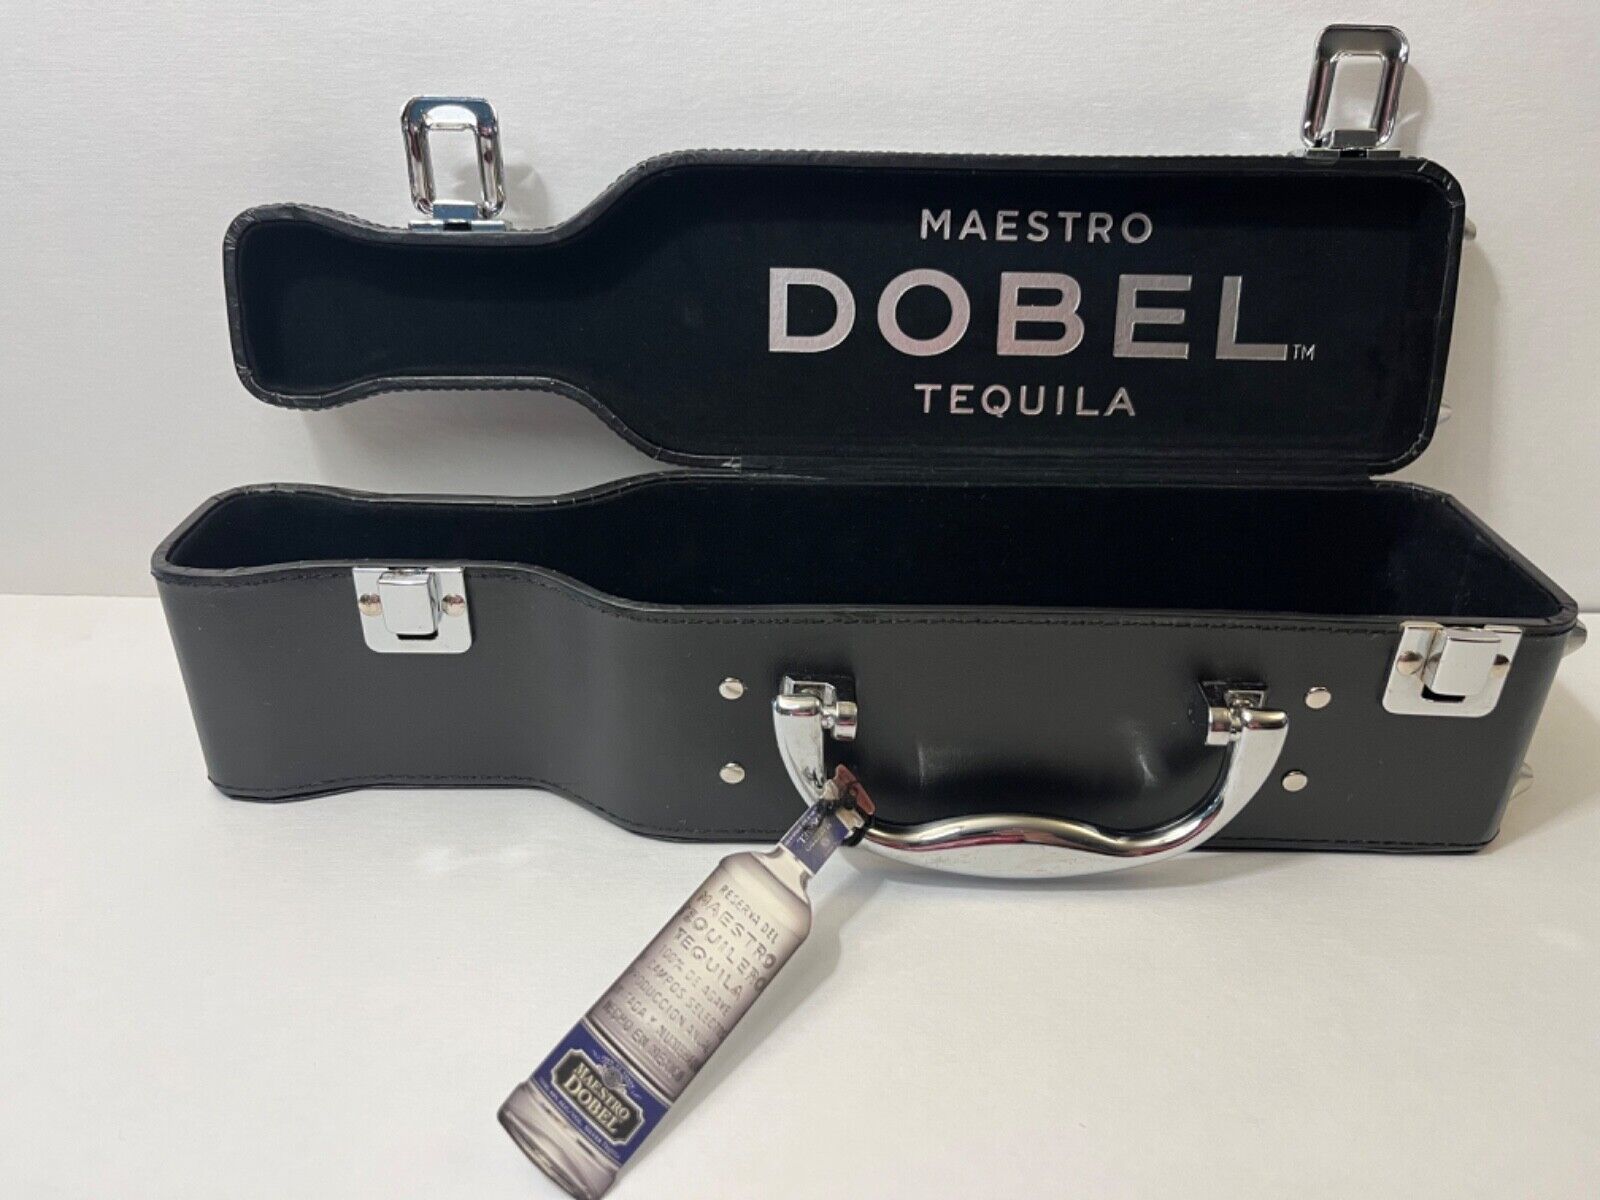 MAESTRO DOBEL Tequila Limited Edition BLACK GUITAR EMPTY CASE Collectible 